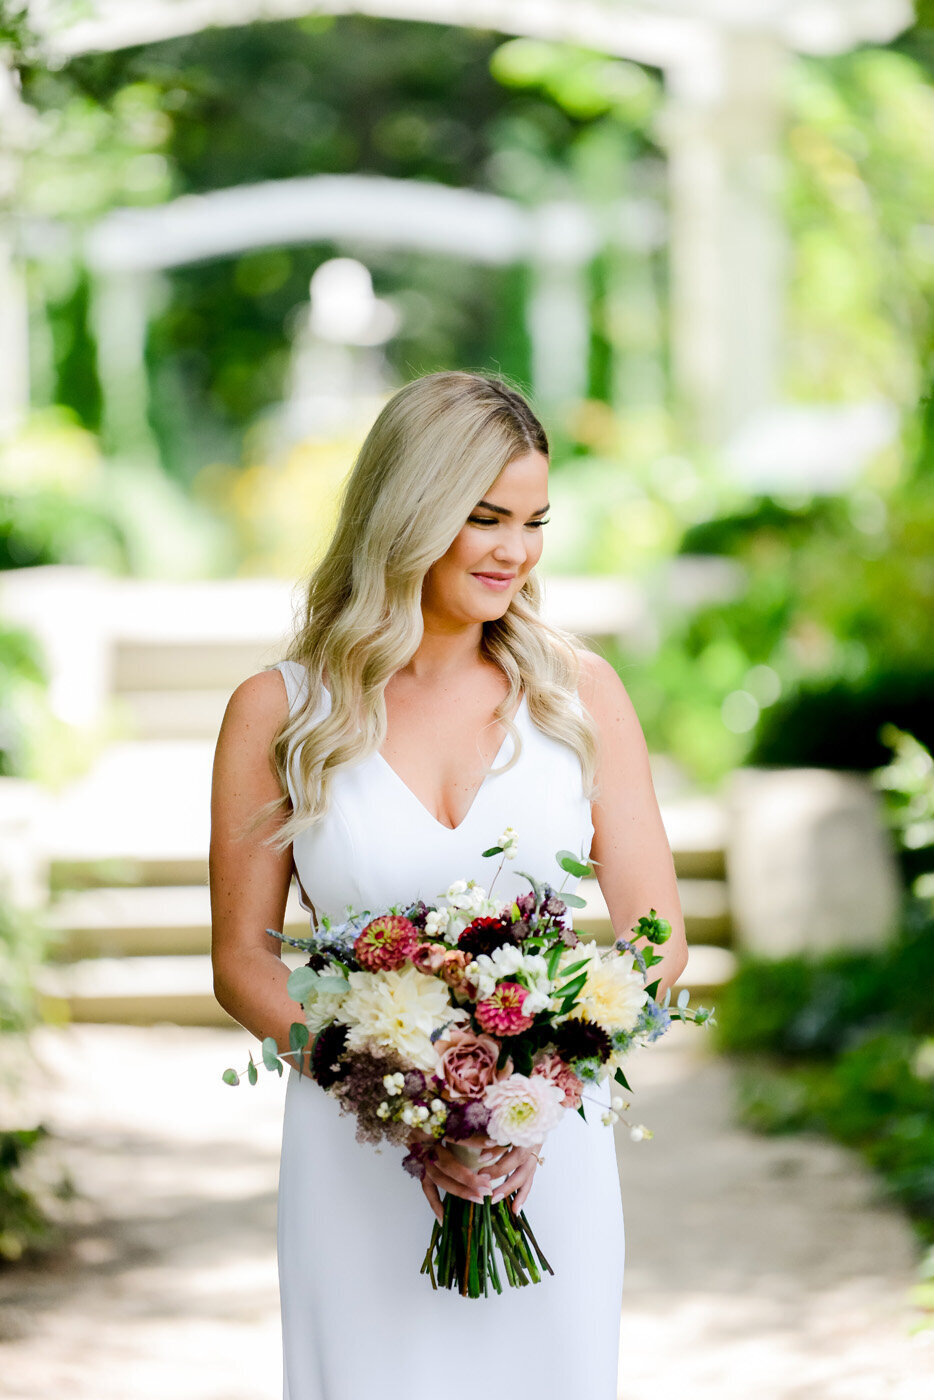 Florist for Weddings and Events - Central Indiana 16